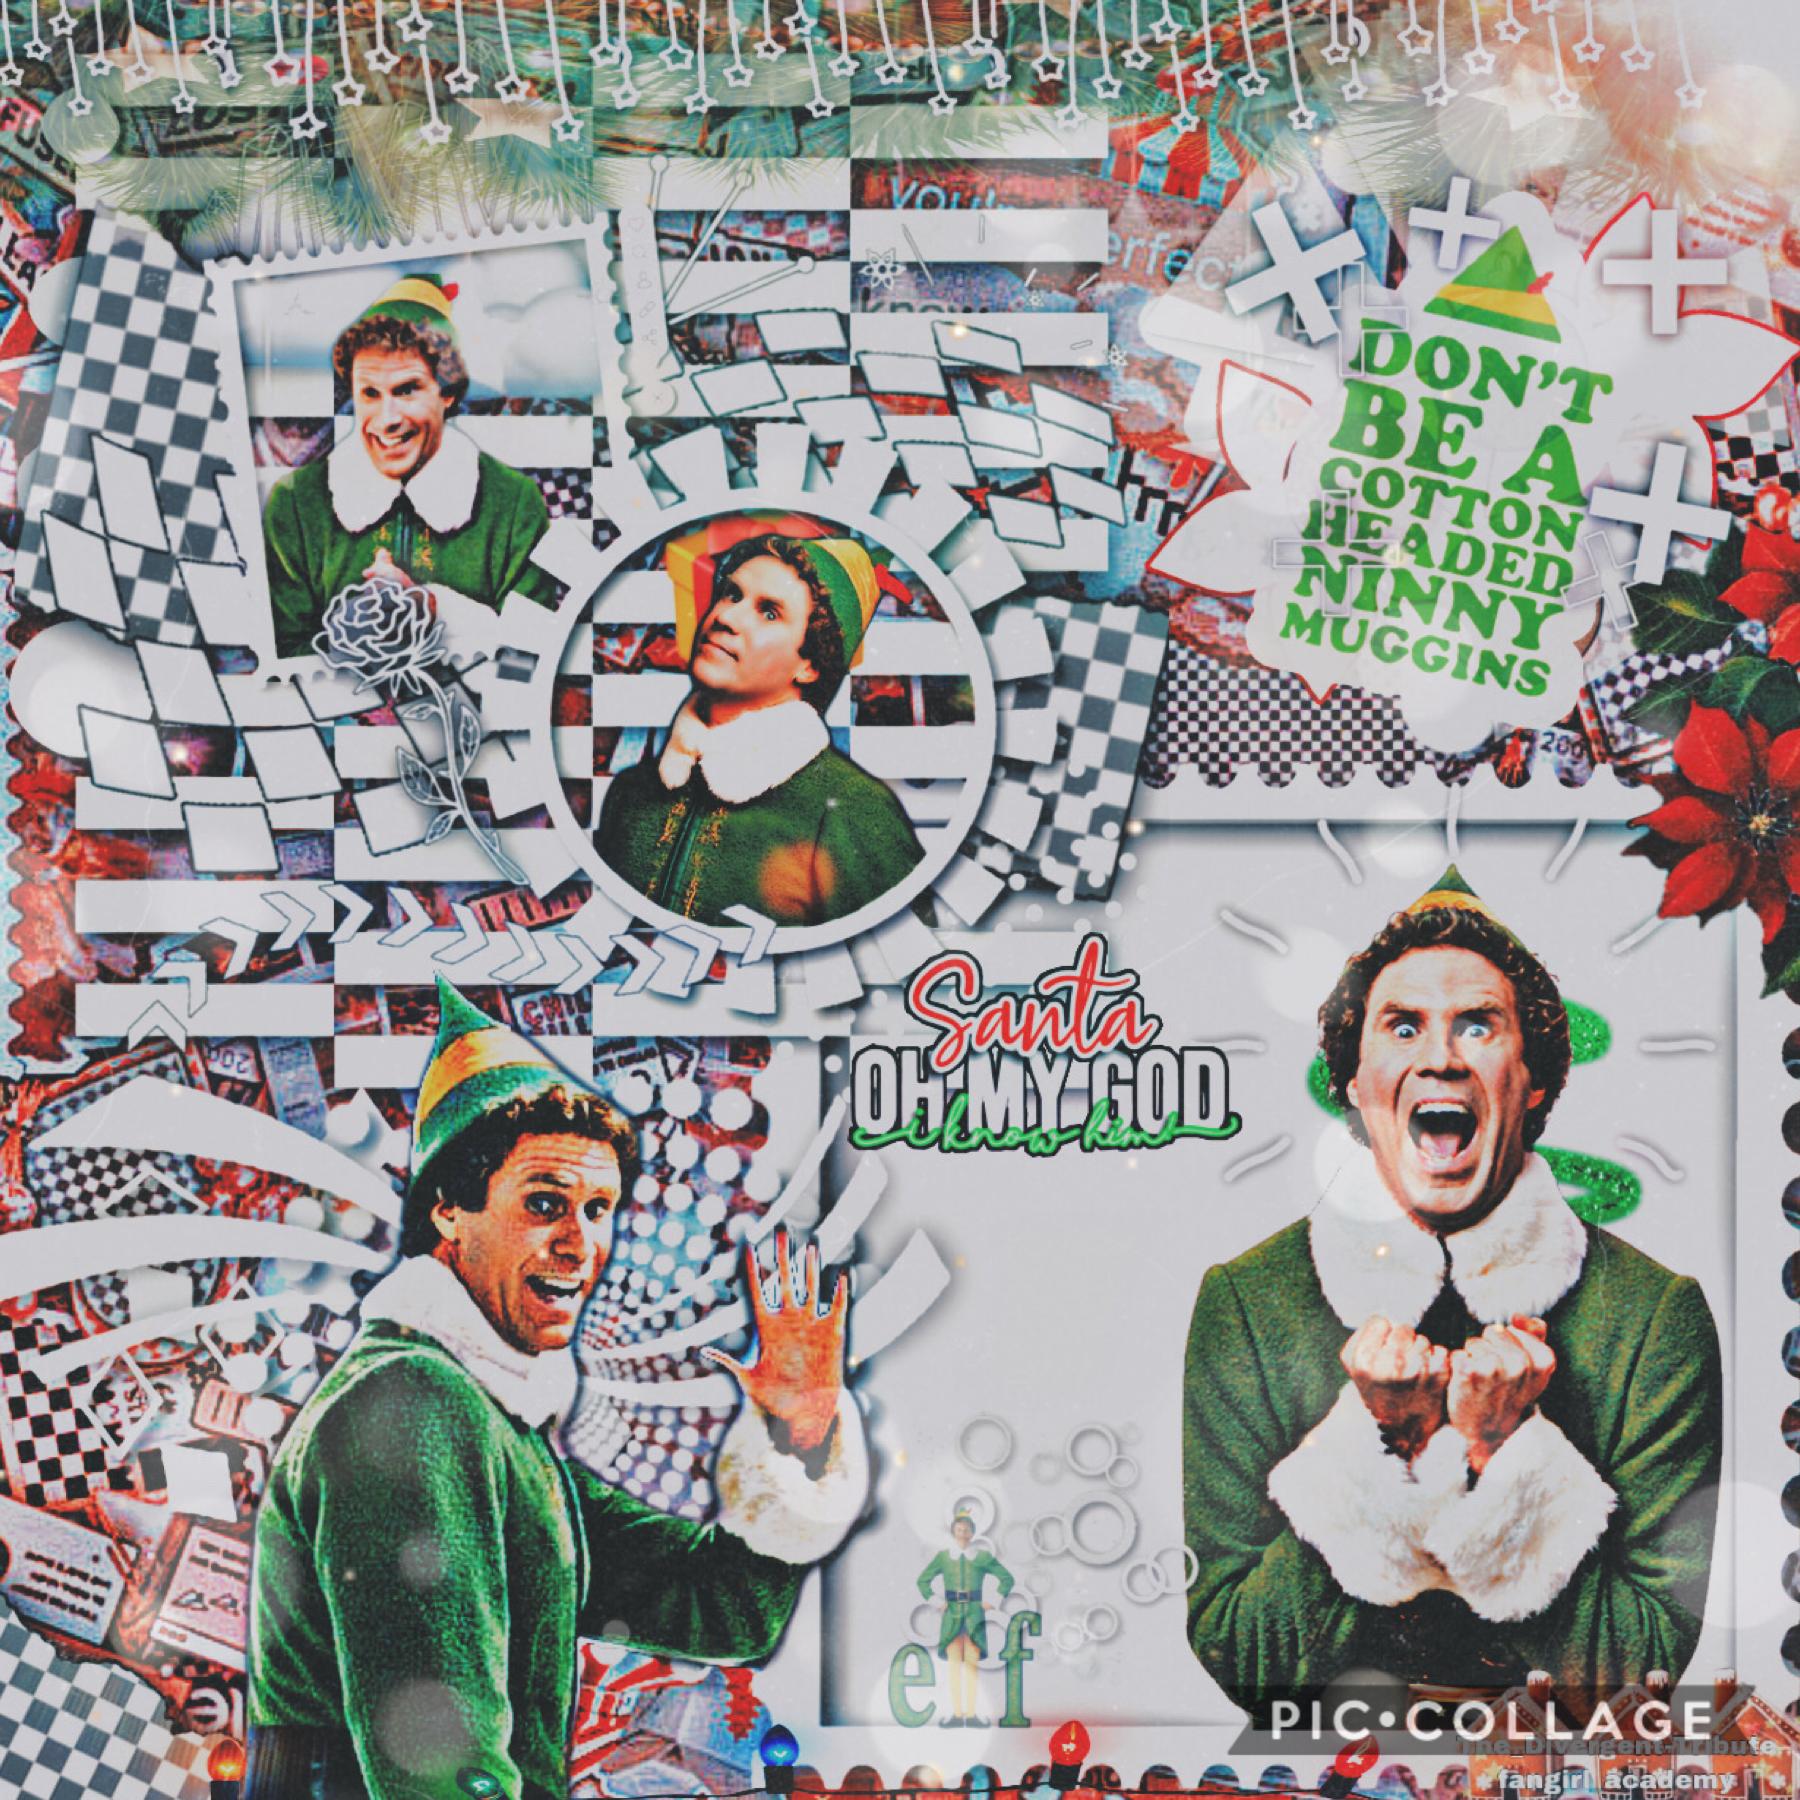 🎄Just wanted to make at least one Christmas edit, so here’s Buddy!!🎄 “Elf” is one of my favorite Christmas movies (we watch it at least 3 times a year, & I can quote the whole movie 😅). 💎Made on PicsArt!💎
QOTD: Excited about Christmas? 👀😁